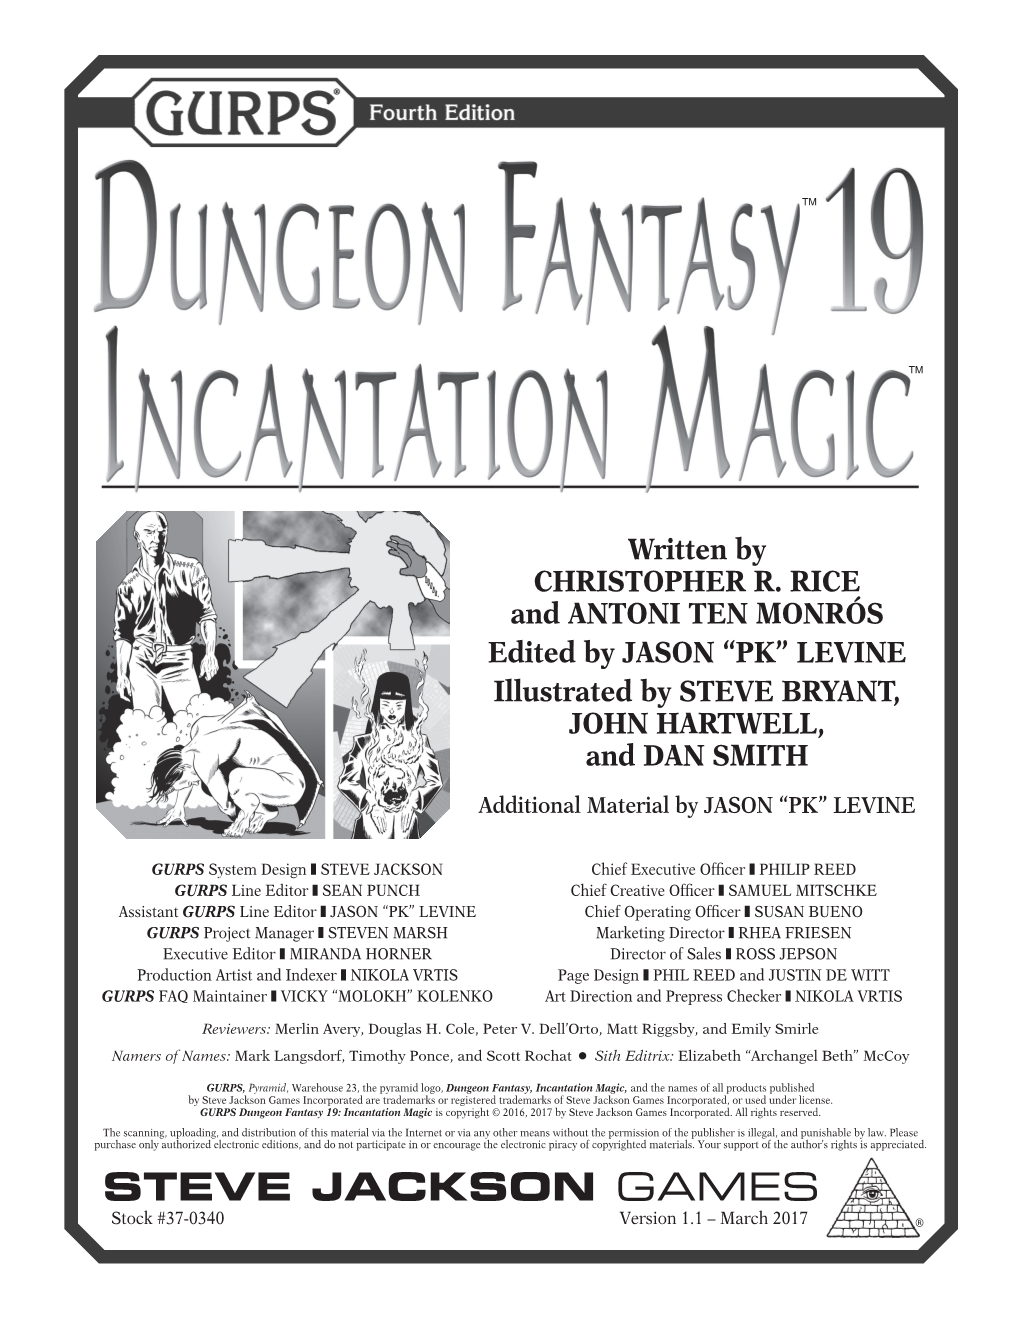 GURPS Dungeon Fantasy 19: Incantation Magic Is Copyright © 2016, 2017 by Steve Jackson Games Incorporated